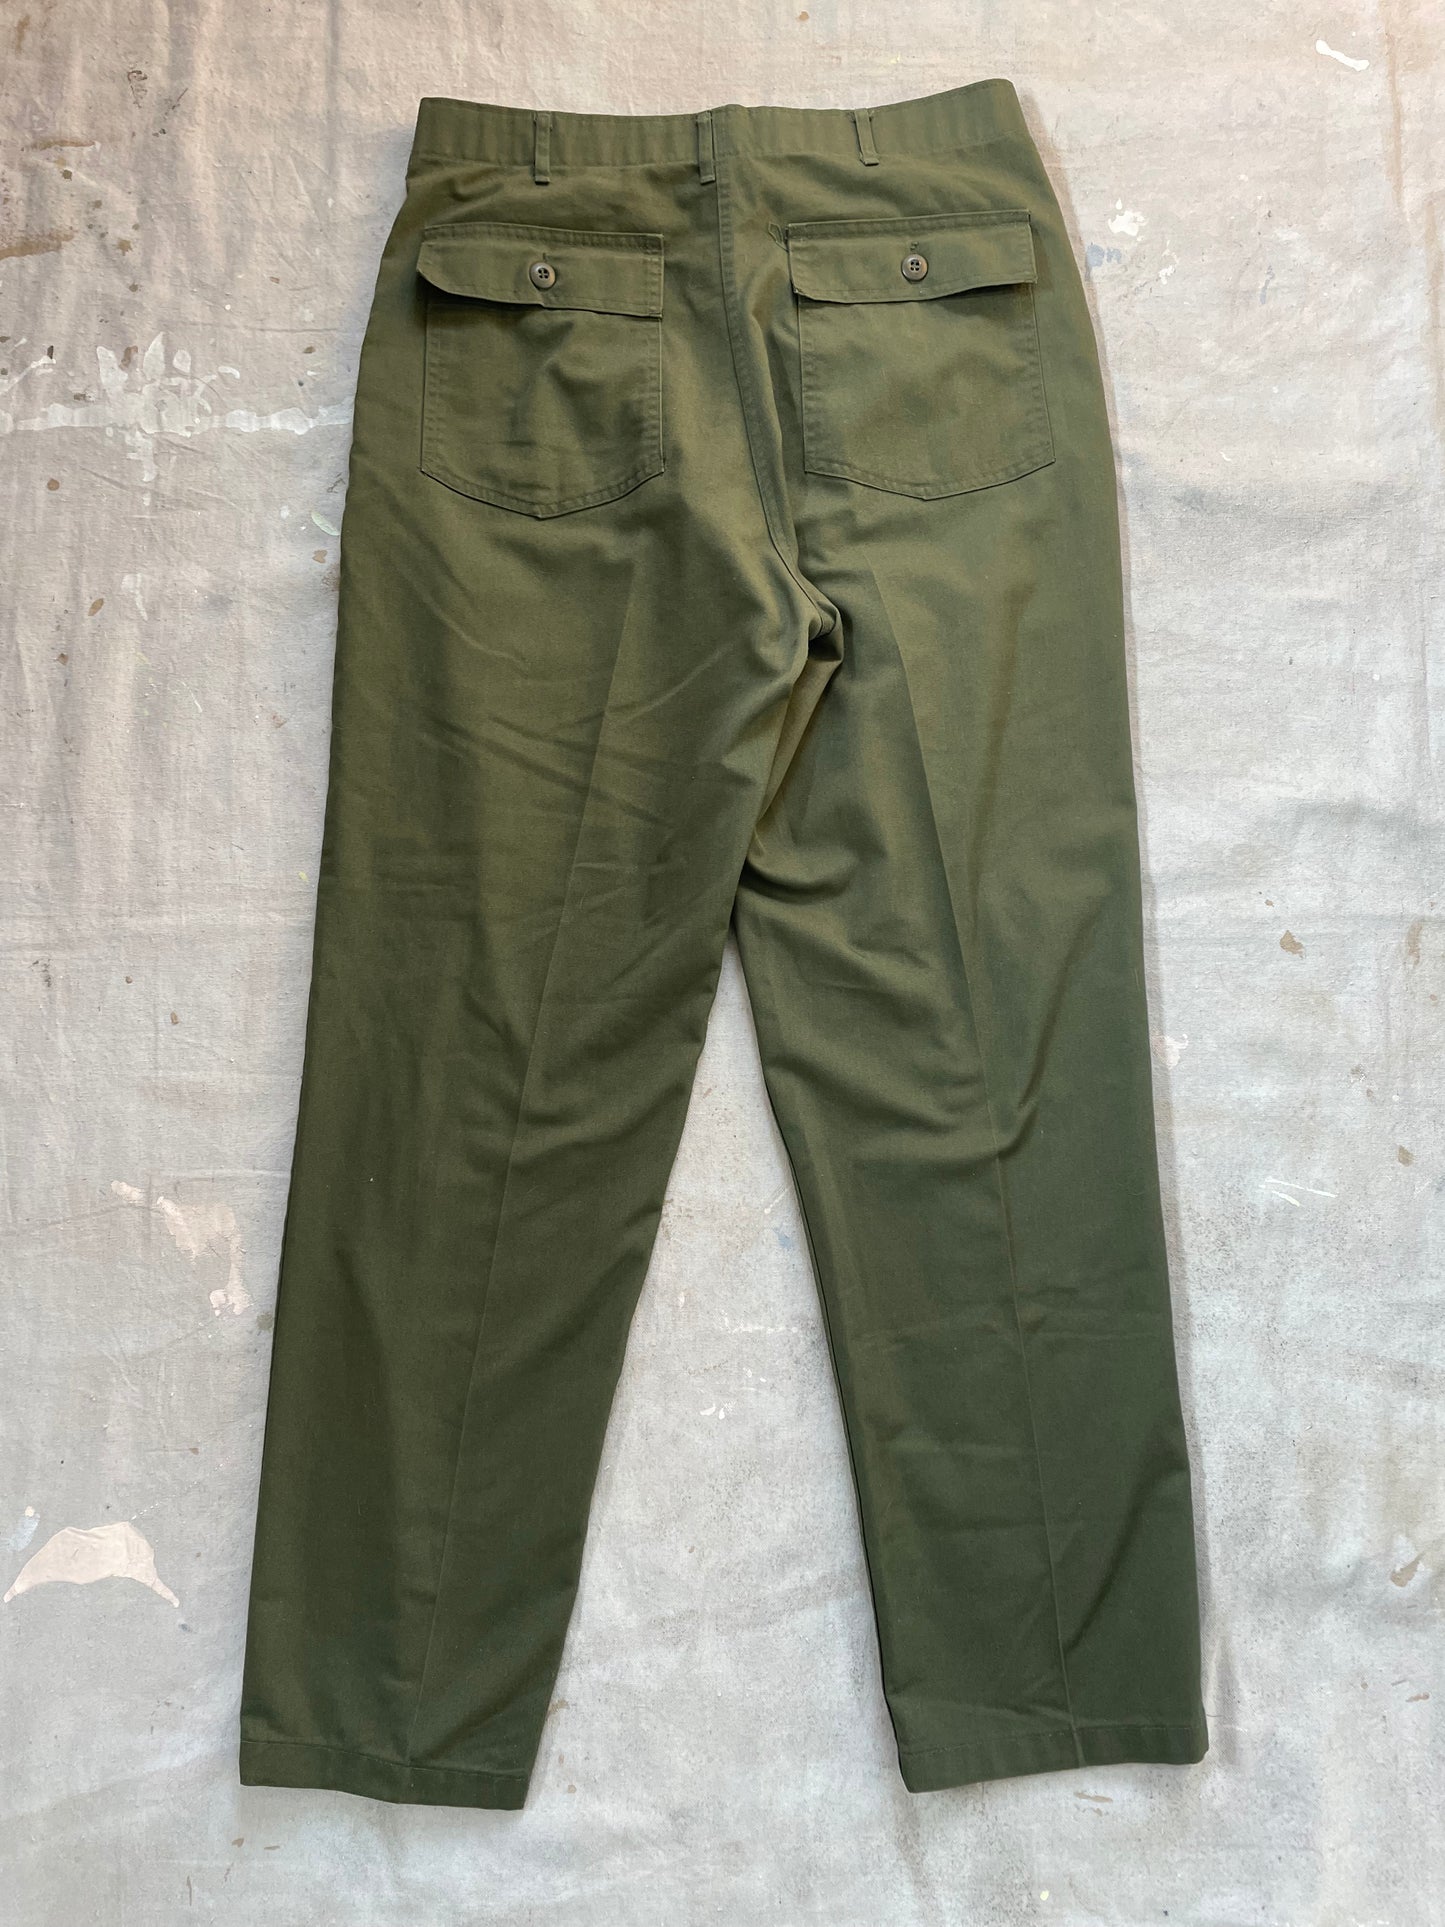 80s OG507 Army Fatigues